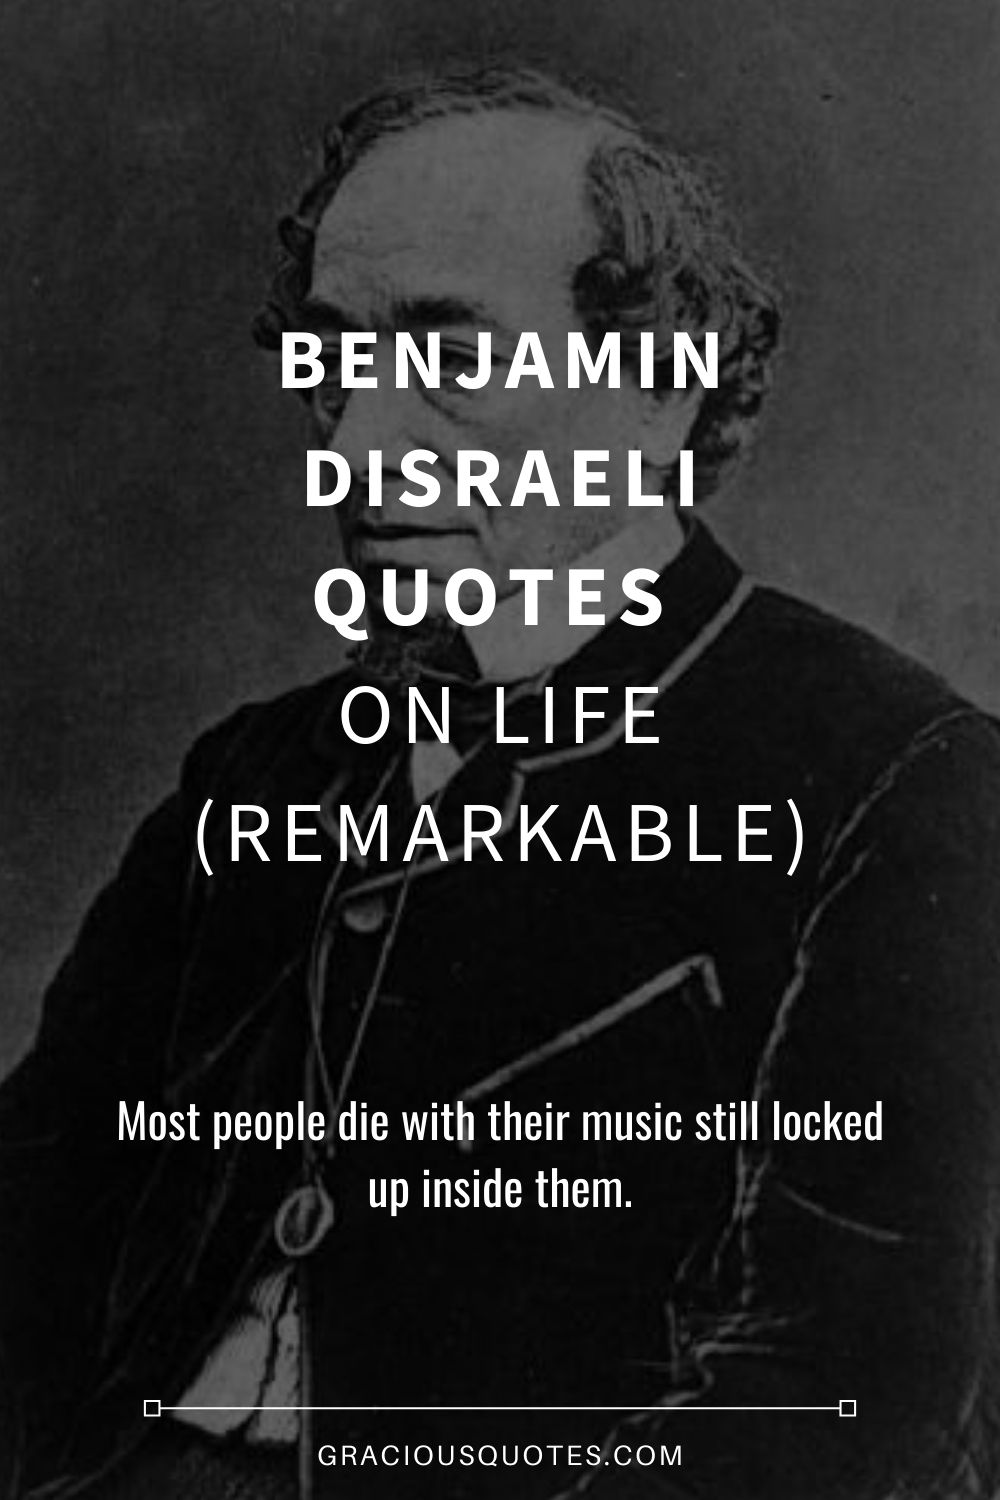 Benjamin Disraeli Quotes on Life (REMARKABLE) - Gracious Quotes